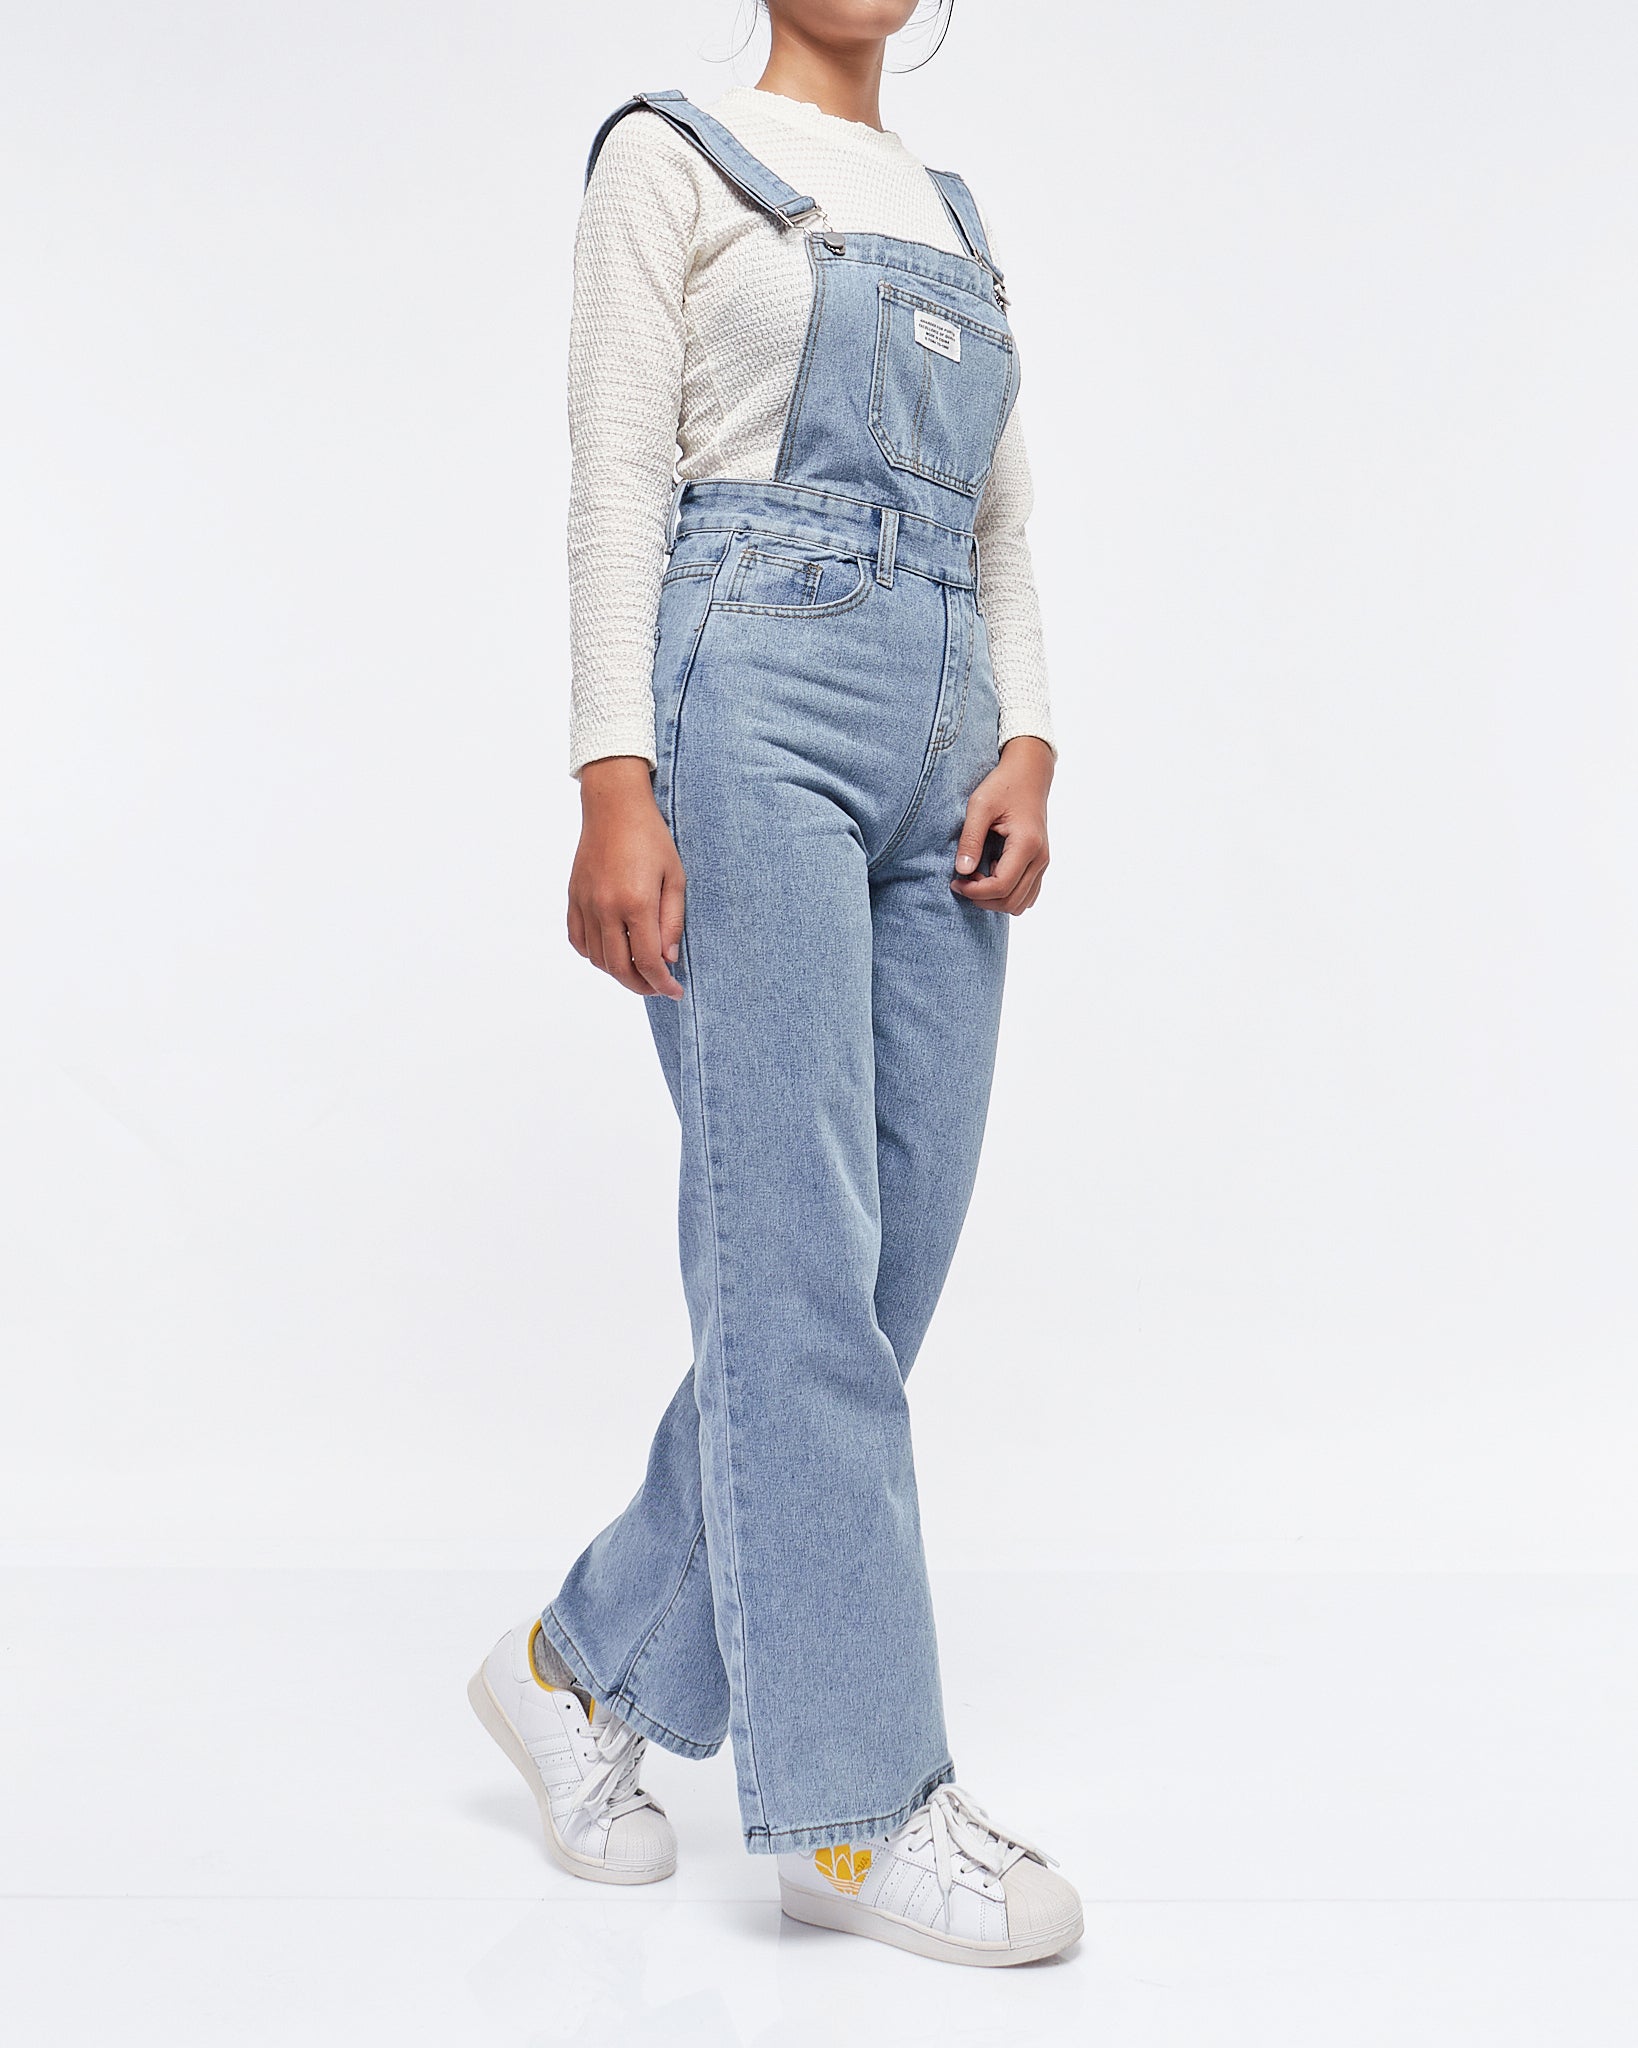 MOI OUTFIT-Lady Denim Overall Jeans 22.90